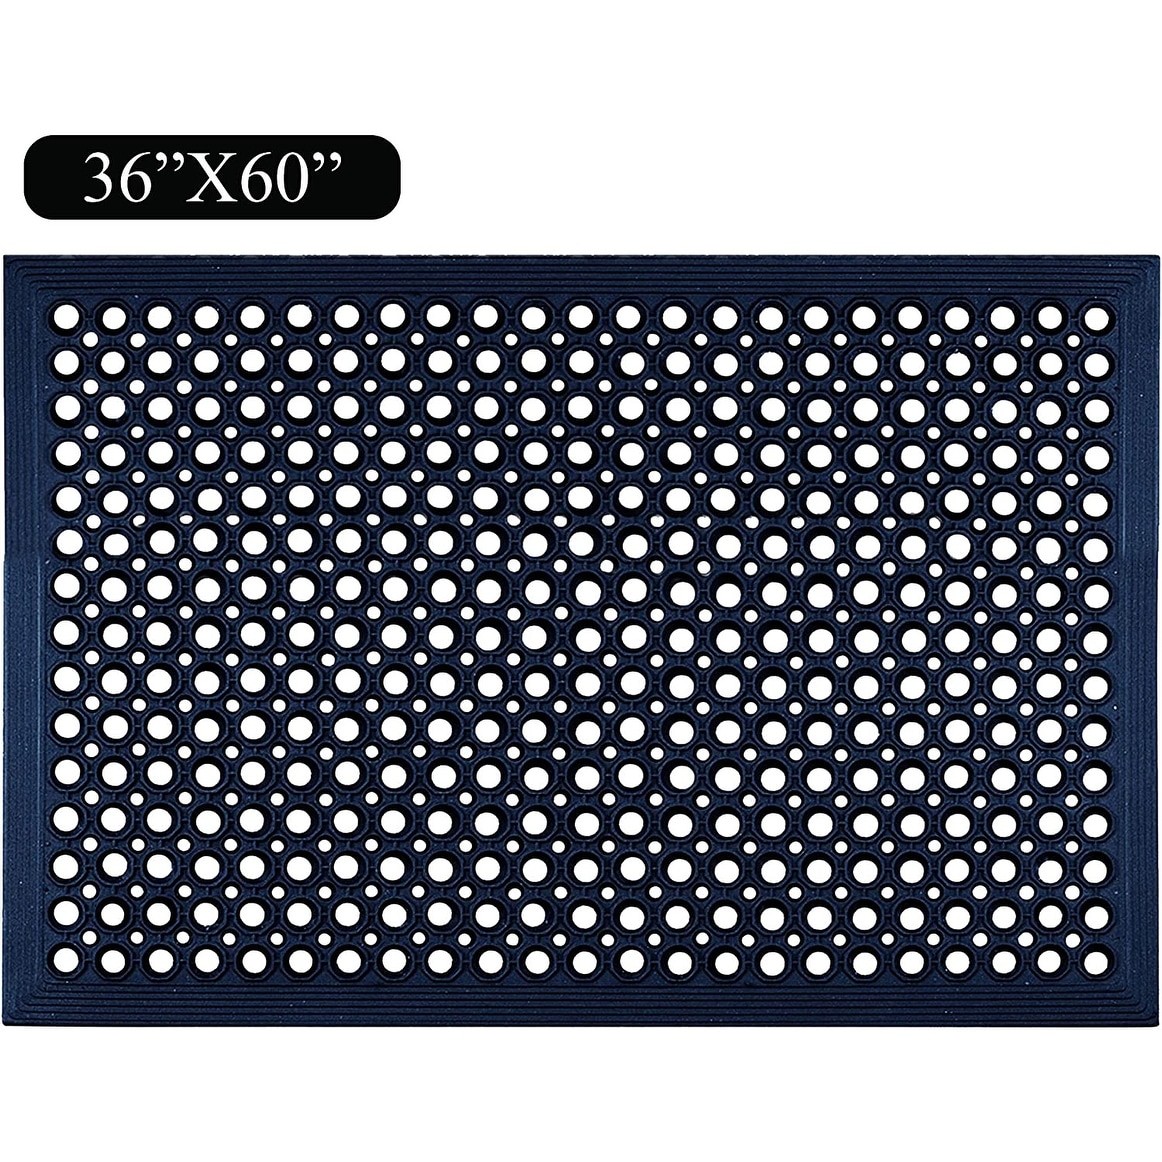 https://ak1.ostkcdn.com/images/products/is/images/direct/1752423f65a2ae9850b8f20b66992ed5a5bd9819/A1HC-Octagonal-Holes-100%25-Rubber-36%22-X-60%22-Ramp-Kitchen-Outdoor-Anti-Fatigue-Mat-%28Black%29.jpg